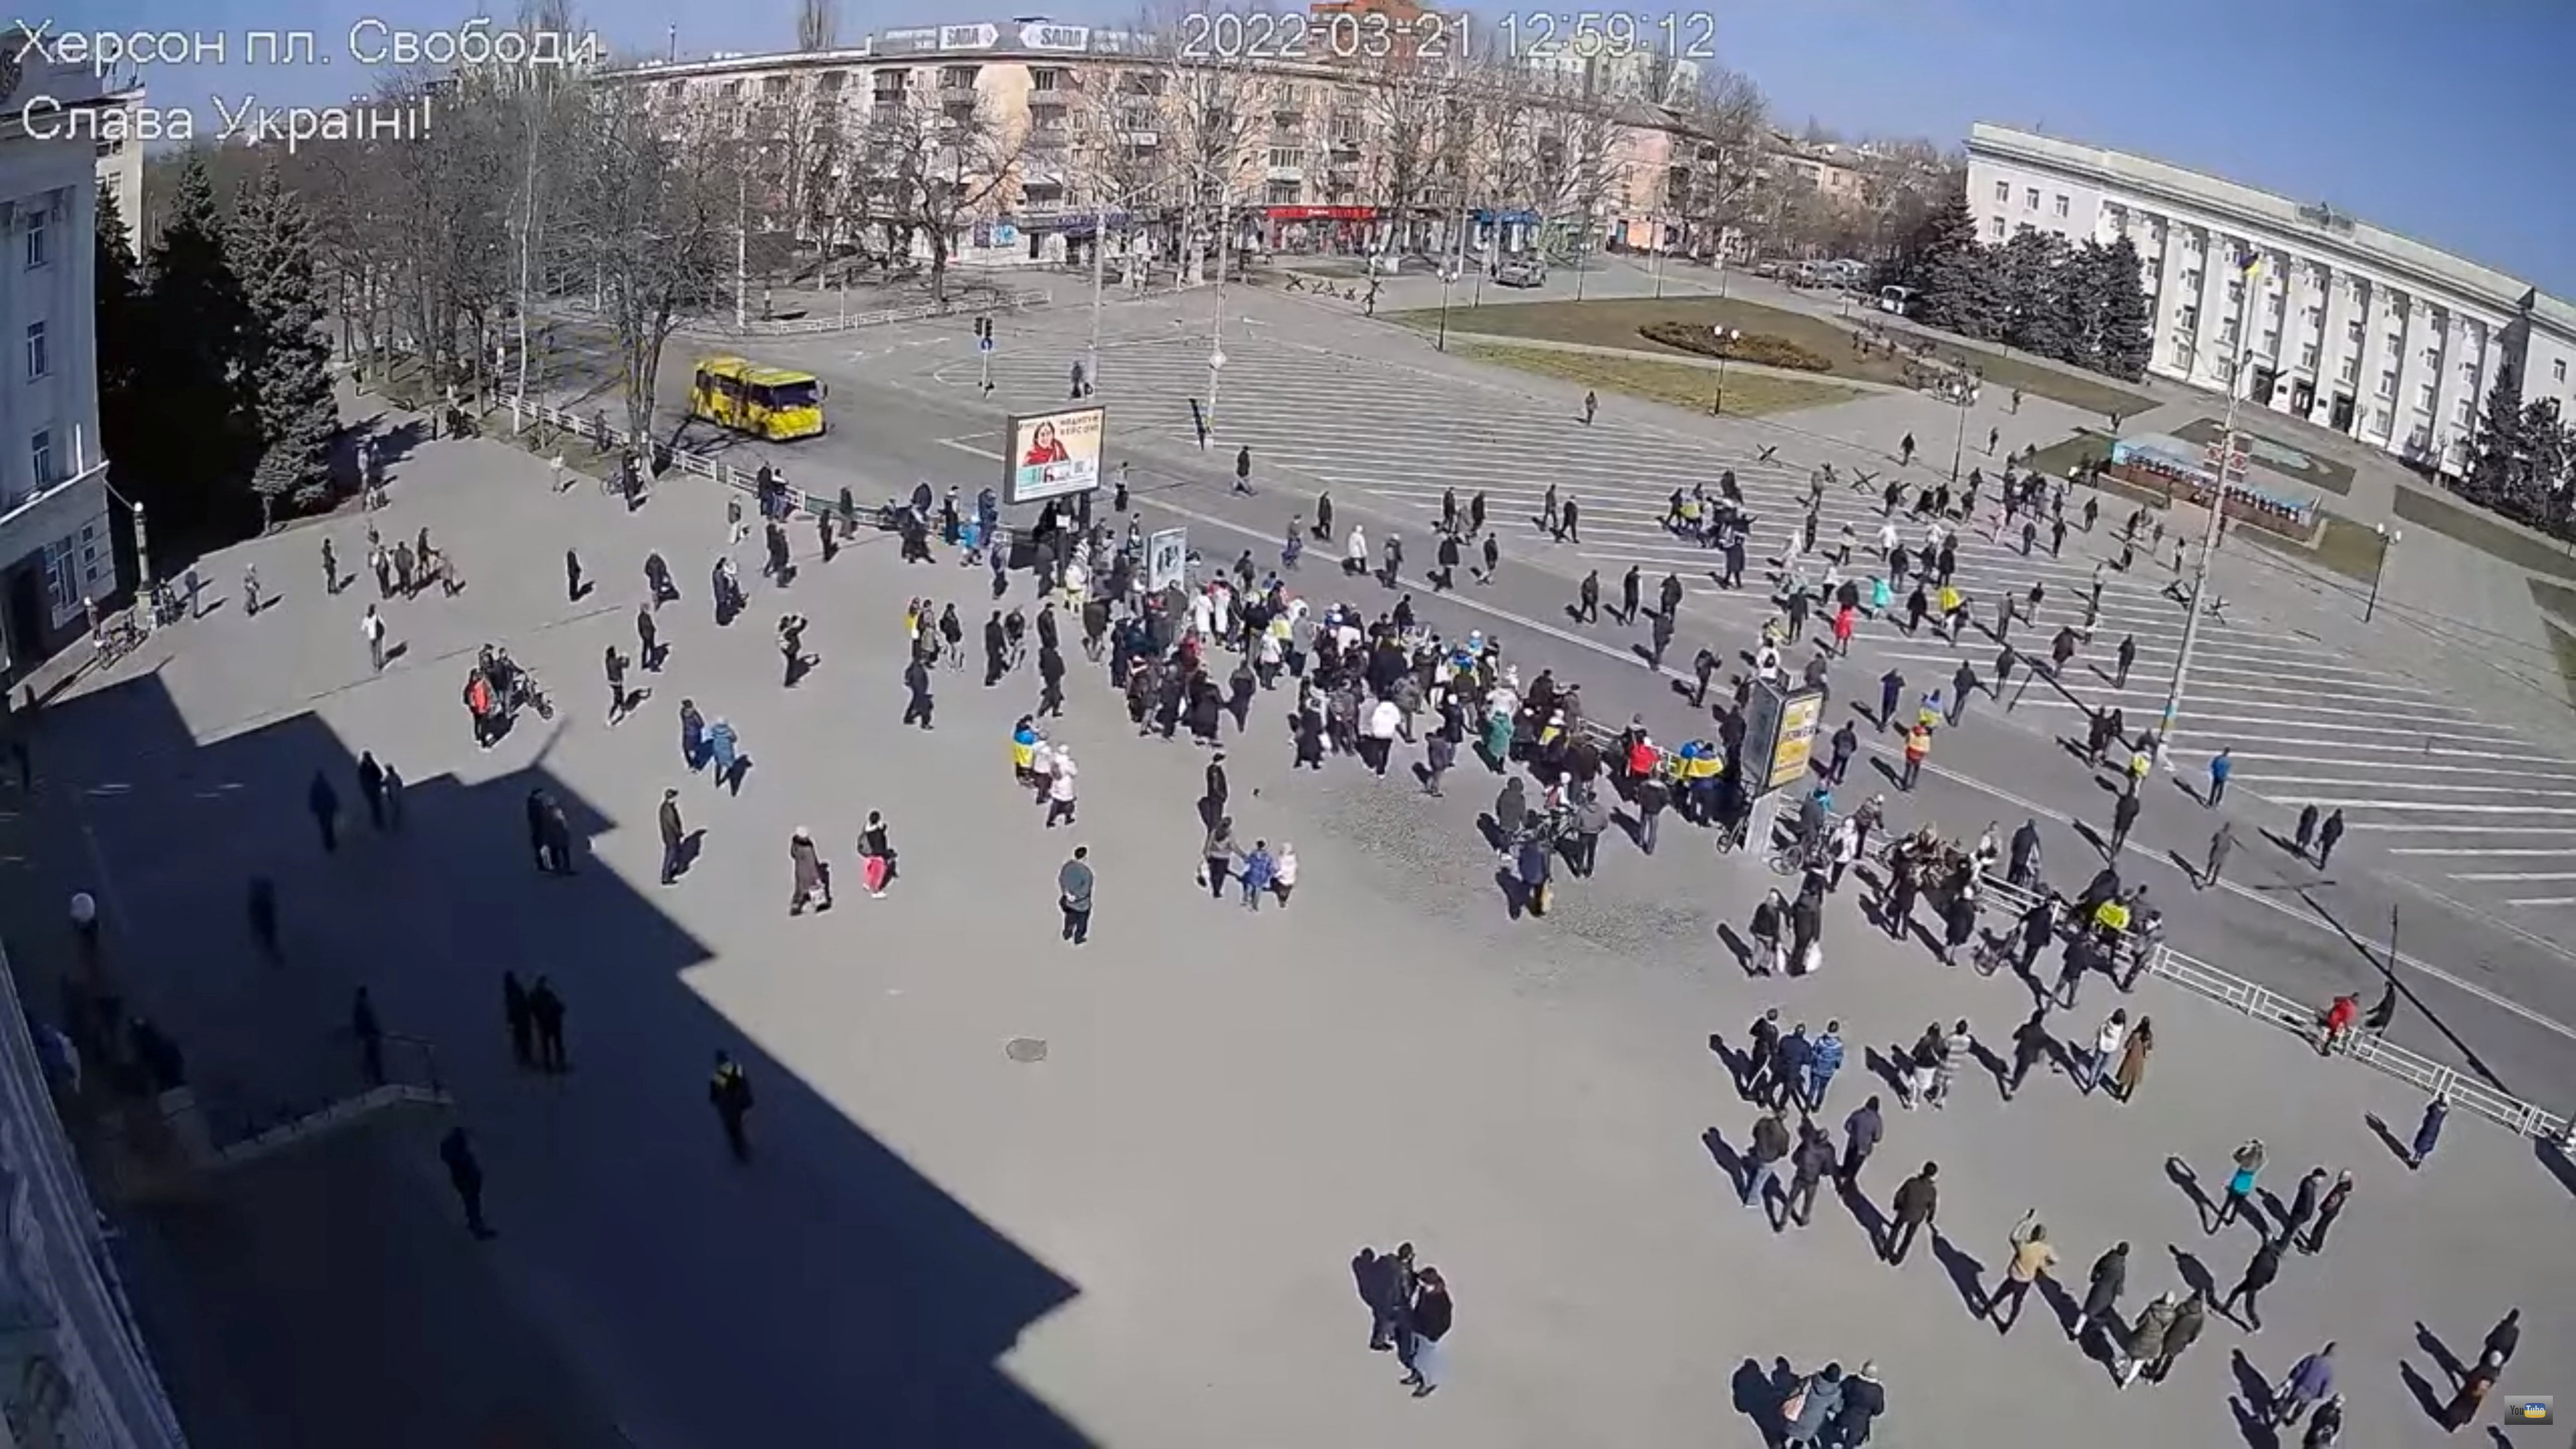 CCTV footage shows Russian troops clashing with protesters in Kherson